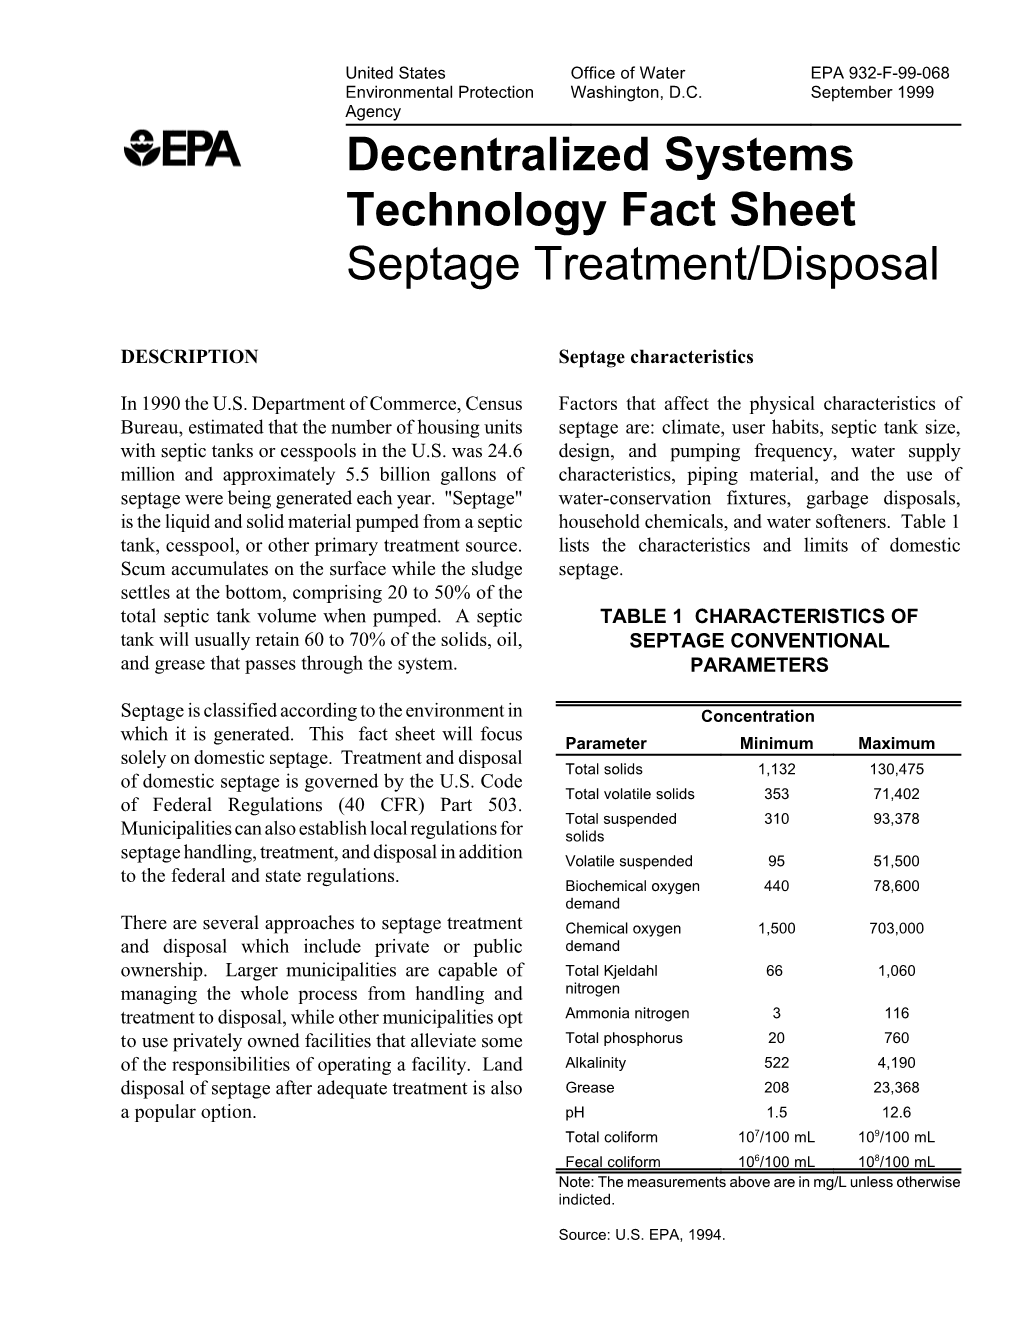 Decentralized Systems Technology Fact Sheet: Septage Treatment